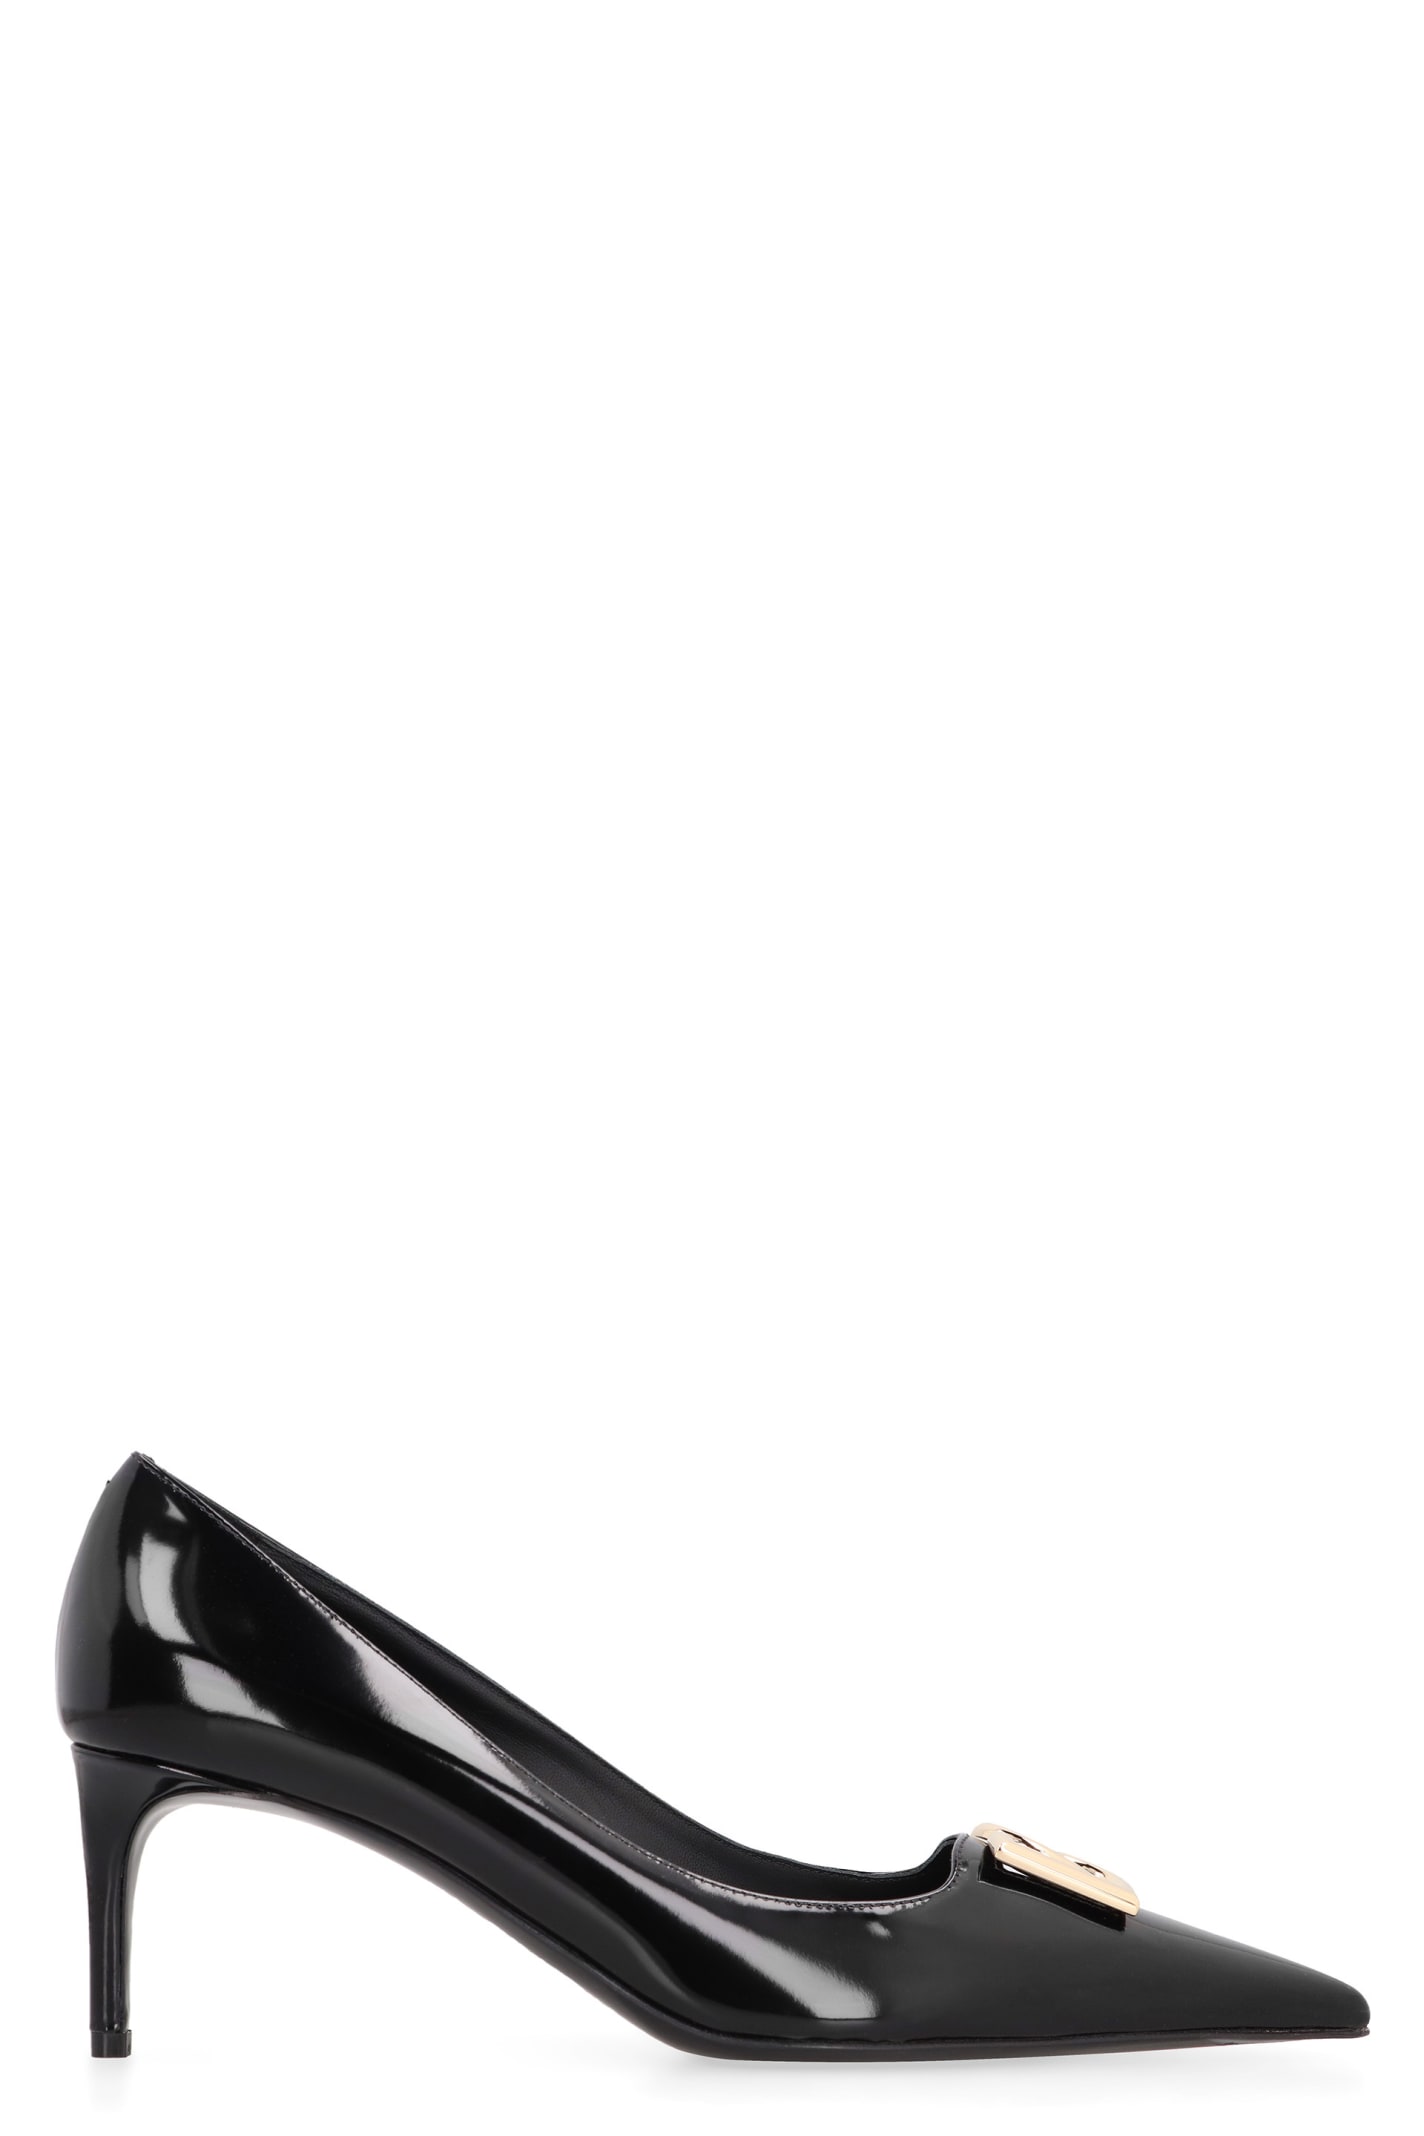 Dolce & Gabbana Leather Pointy-toe Pumps In Black